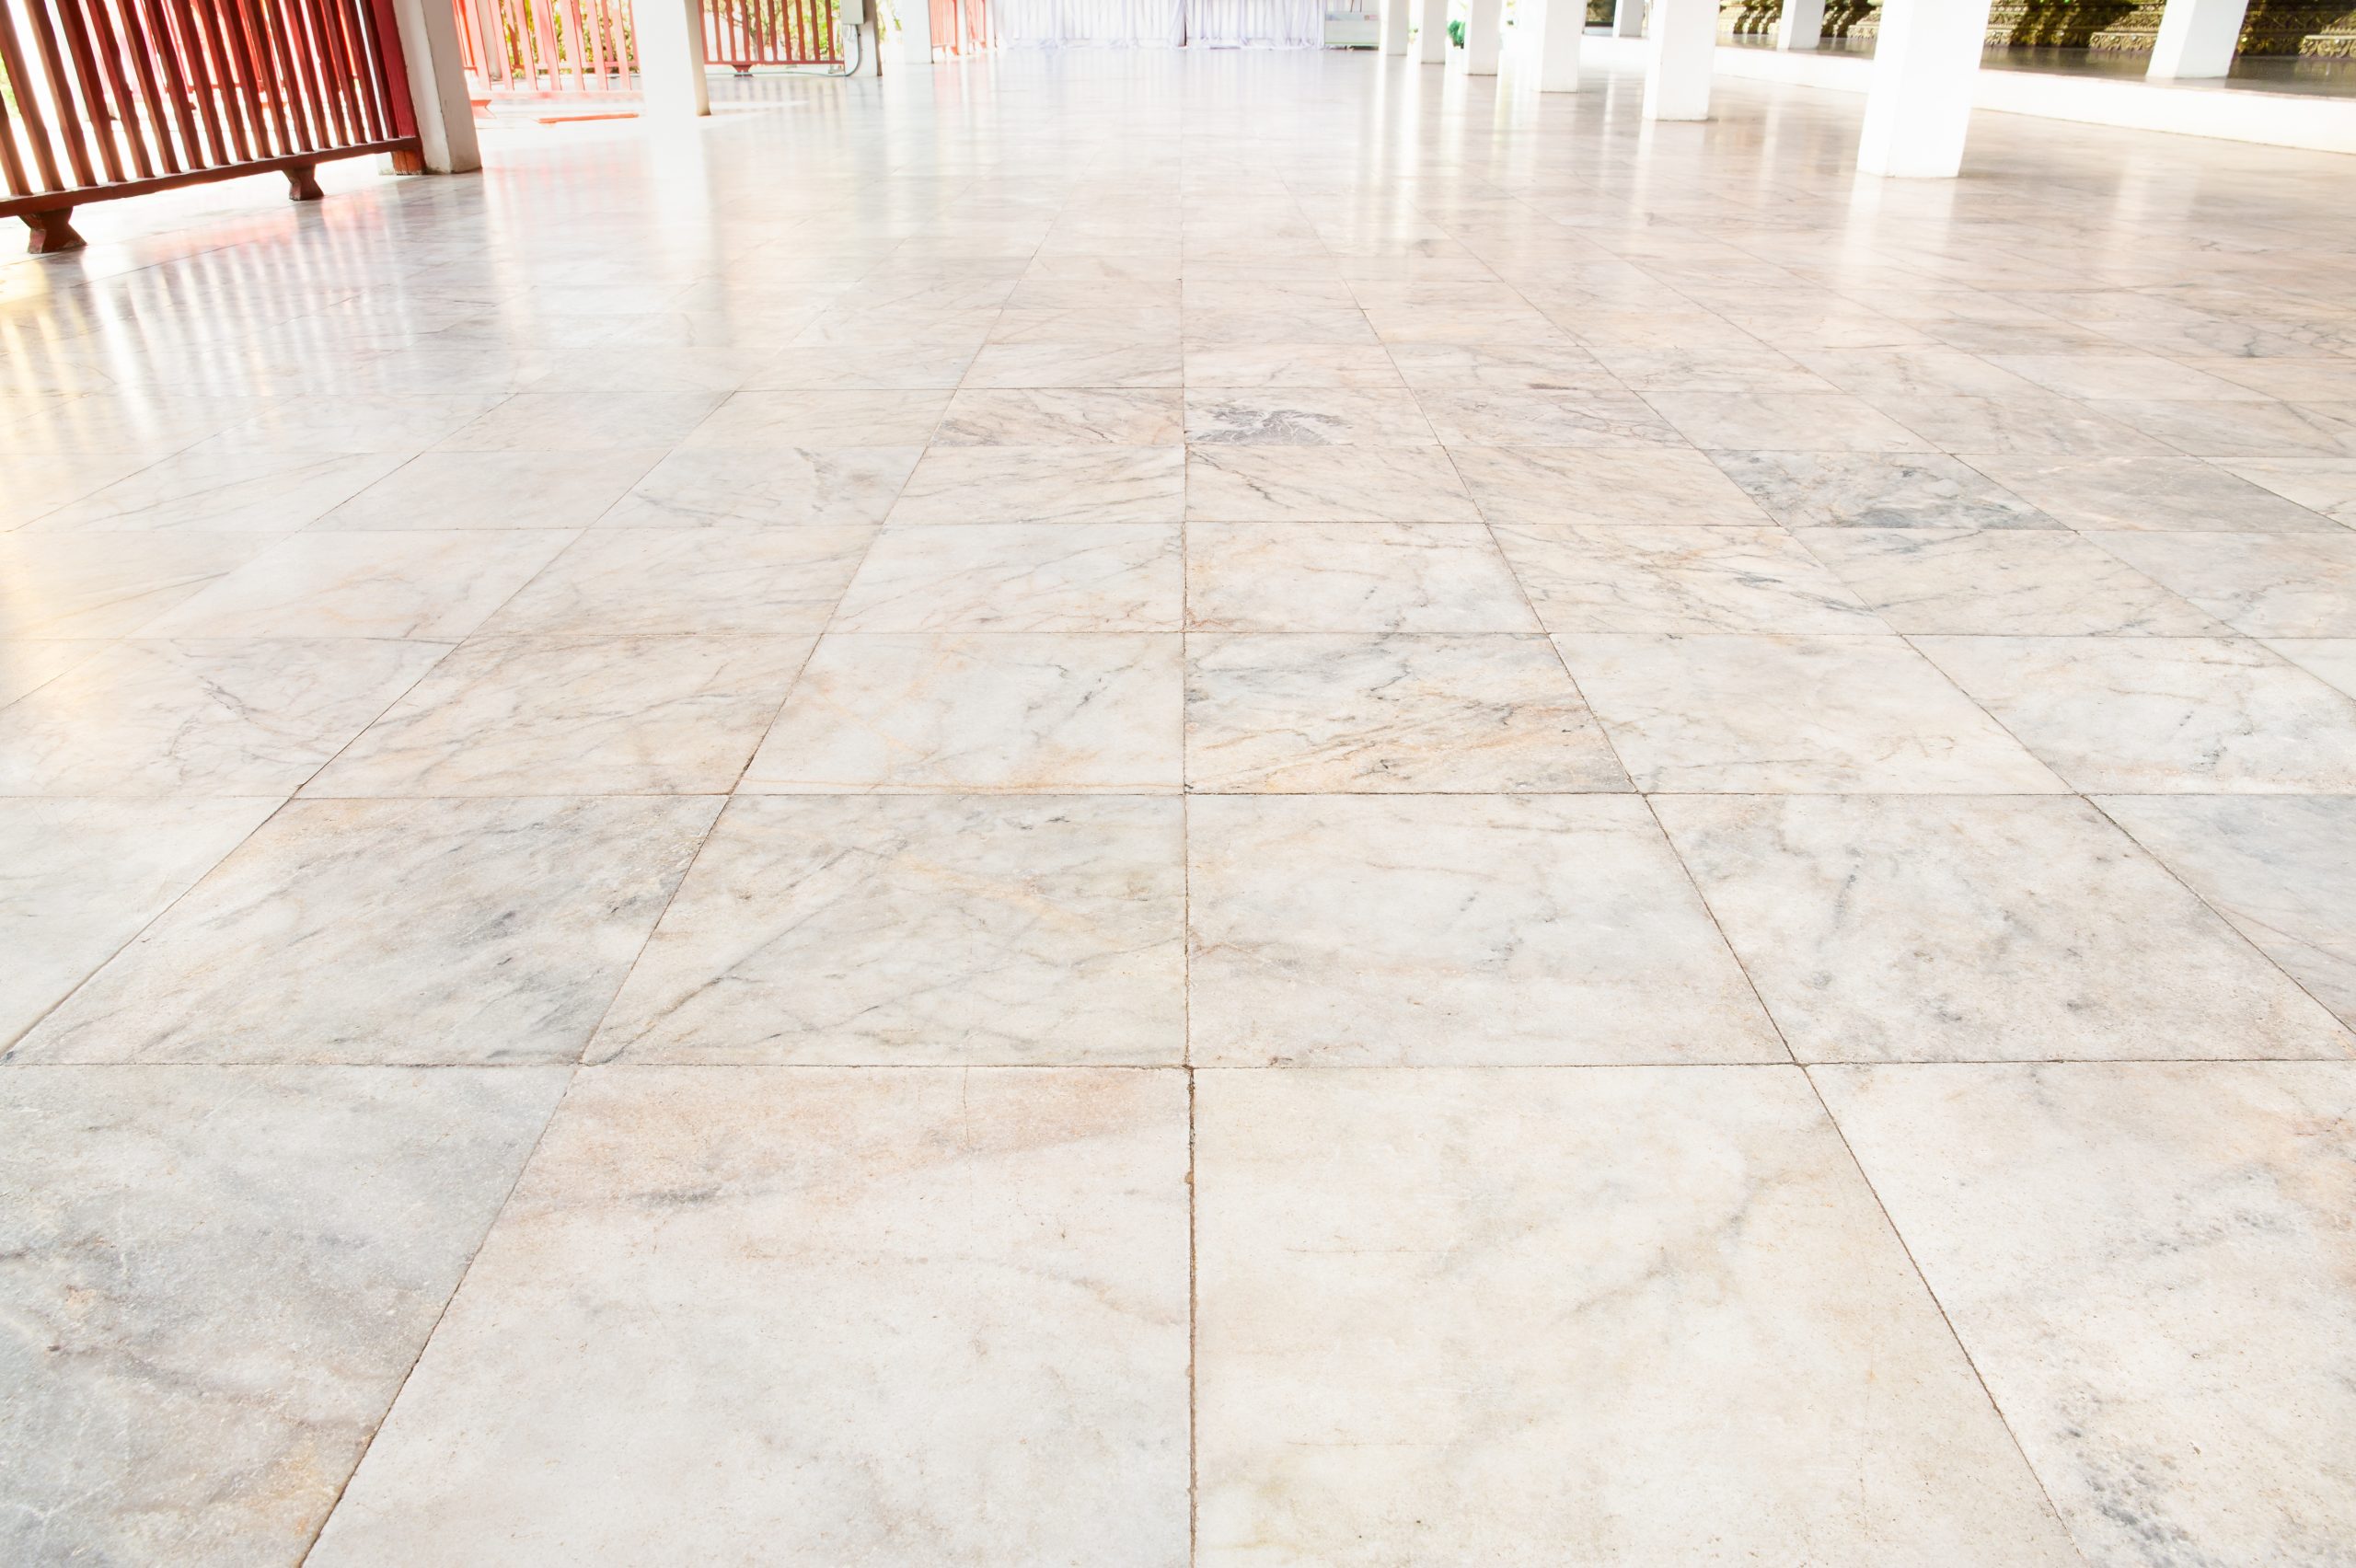 Natural stone floor tile professionally clean